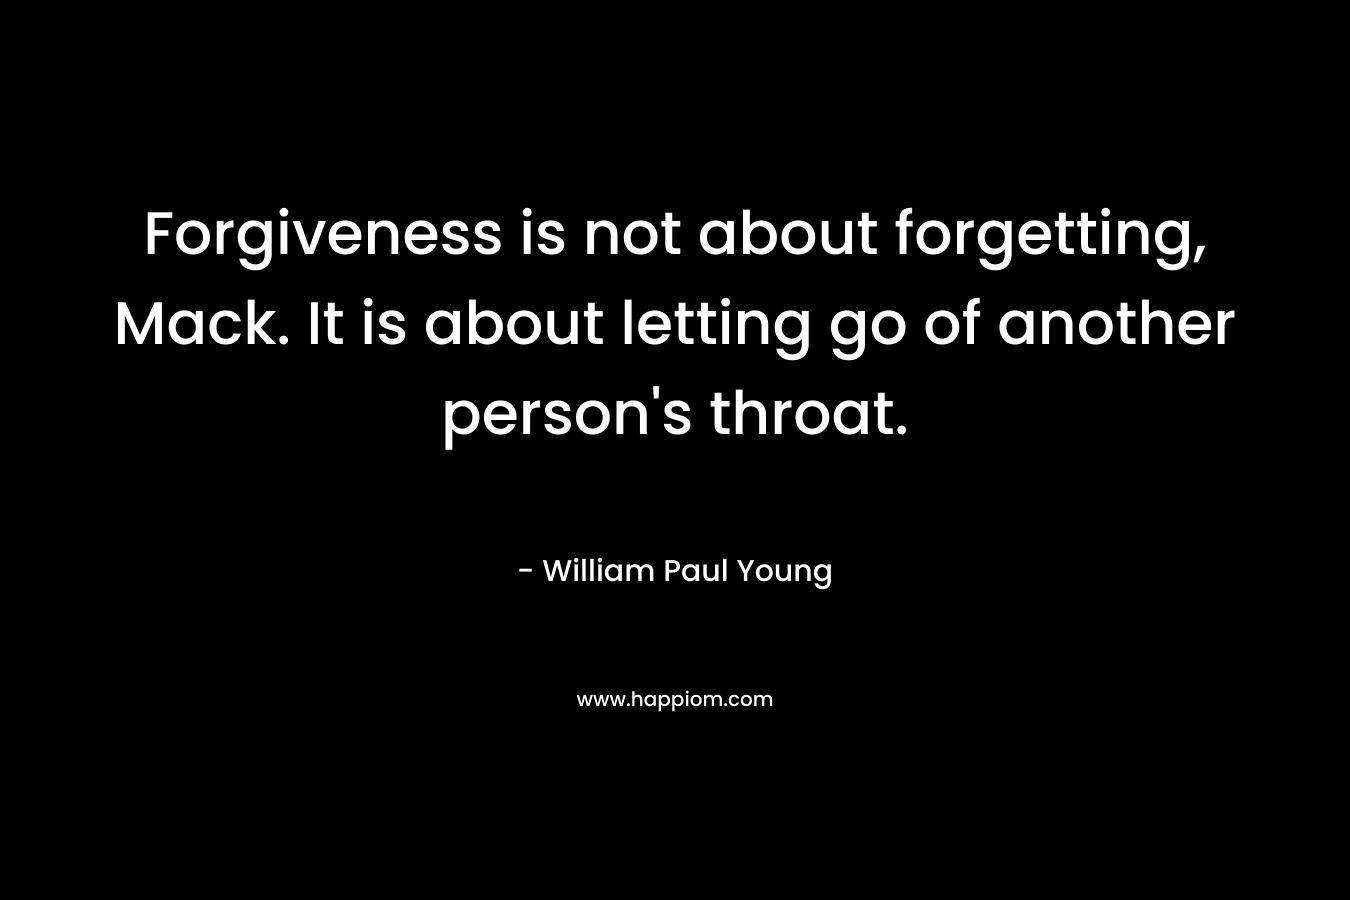 Forgiveness is not about forgetting, Mack. It is about letting go of another person’s throat. – William Paul Young